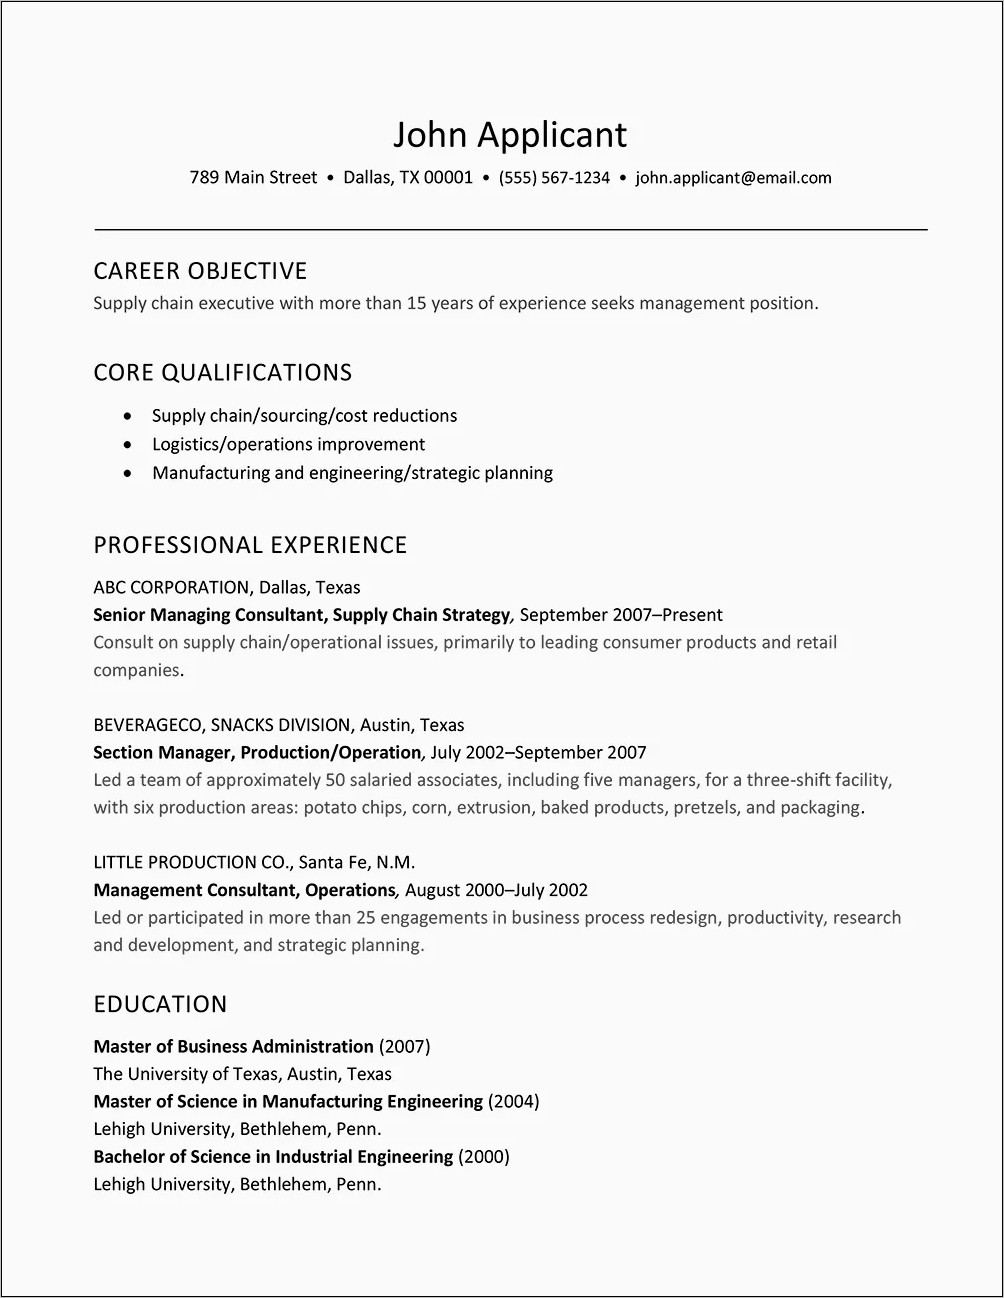 Business Process Management Consultant Resume